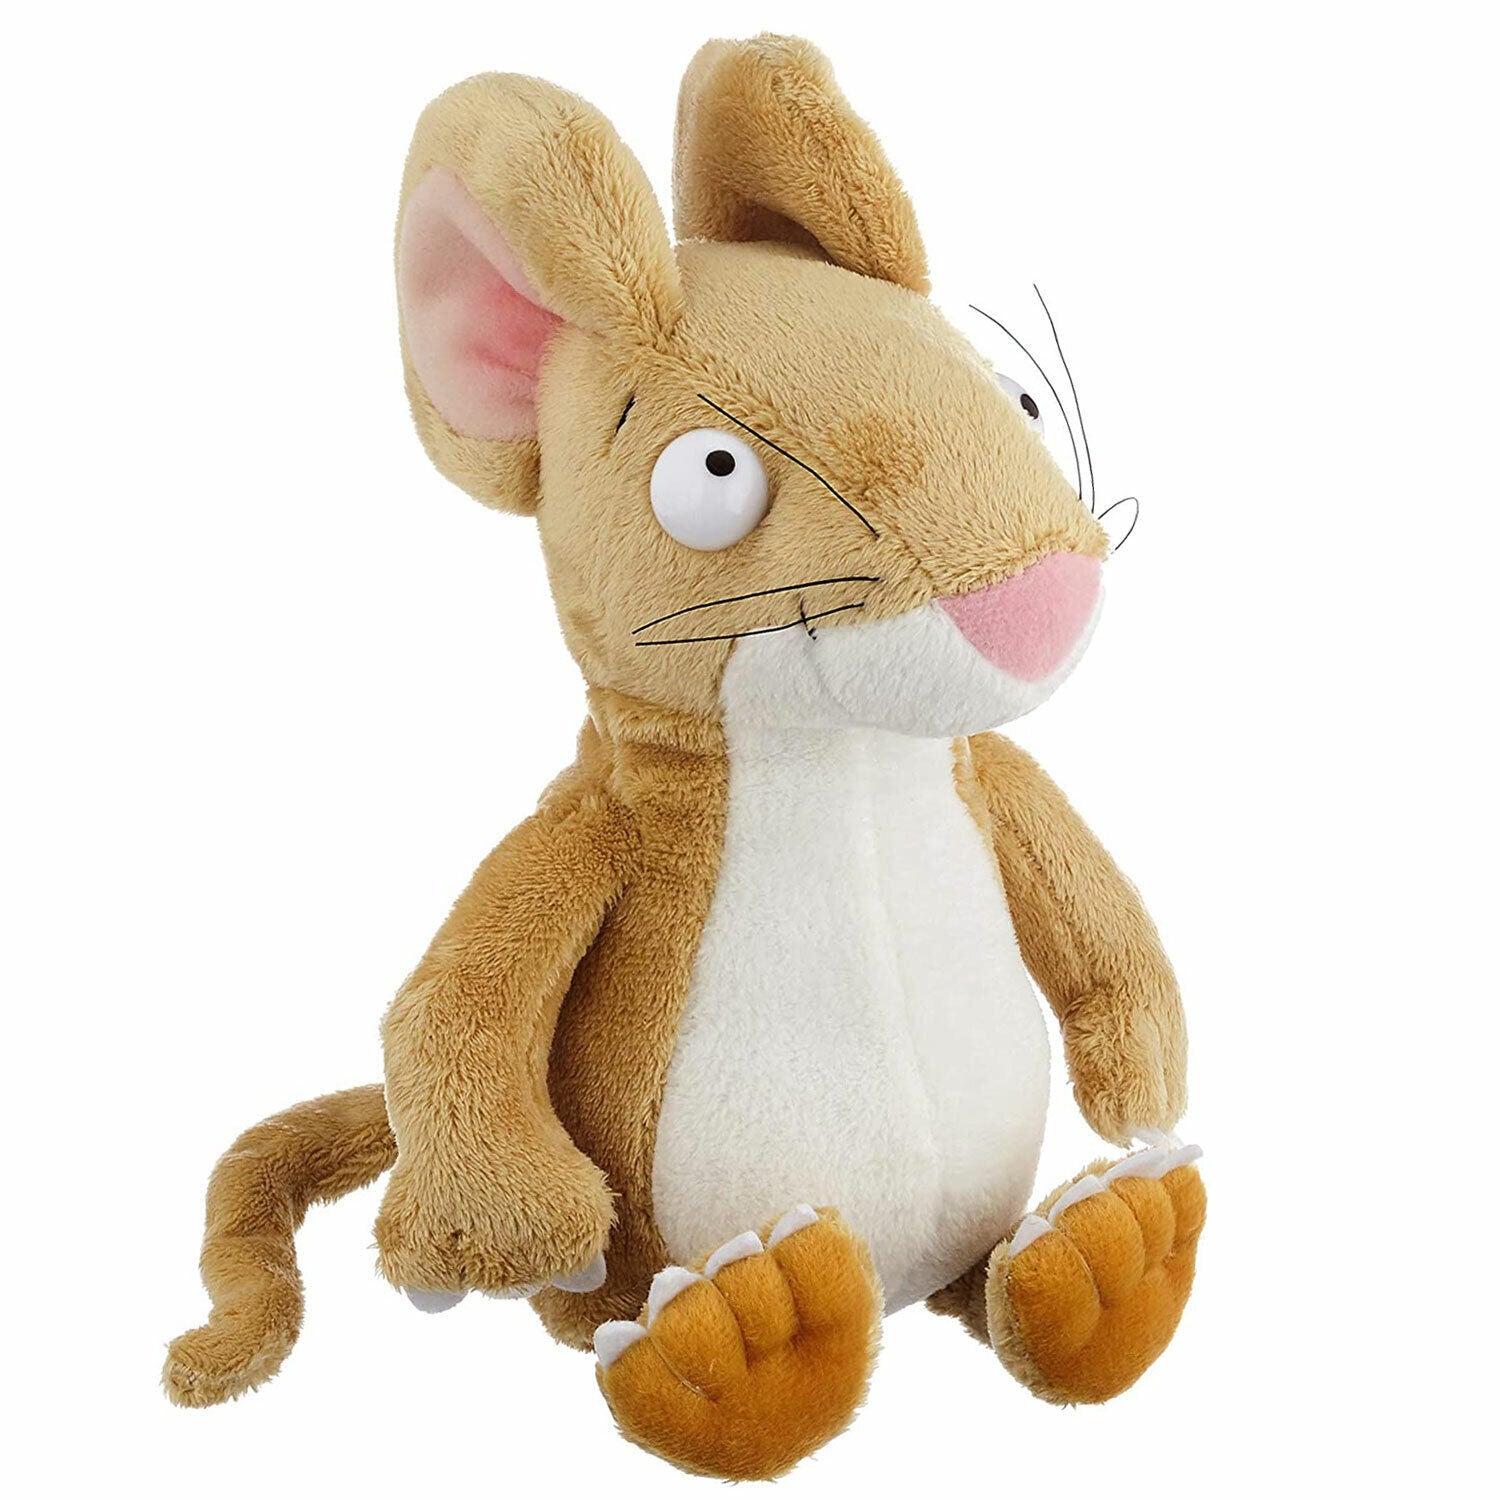 New Gruffalo Mouse 9" Plush Soft Toy - Official Licensed Merchandise